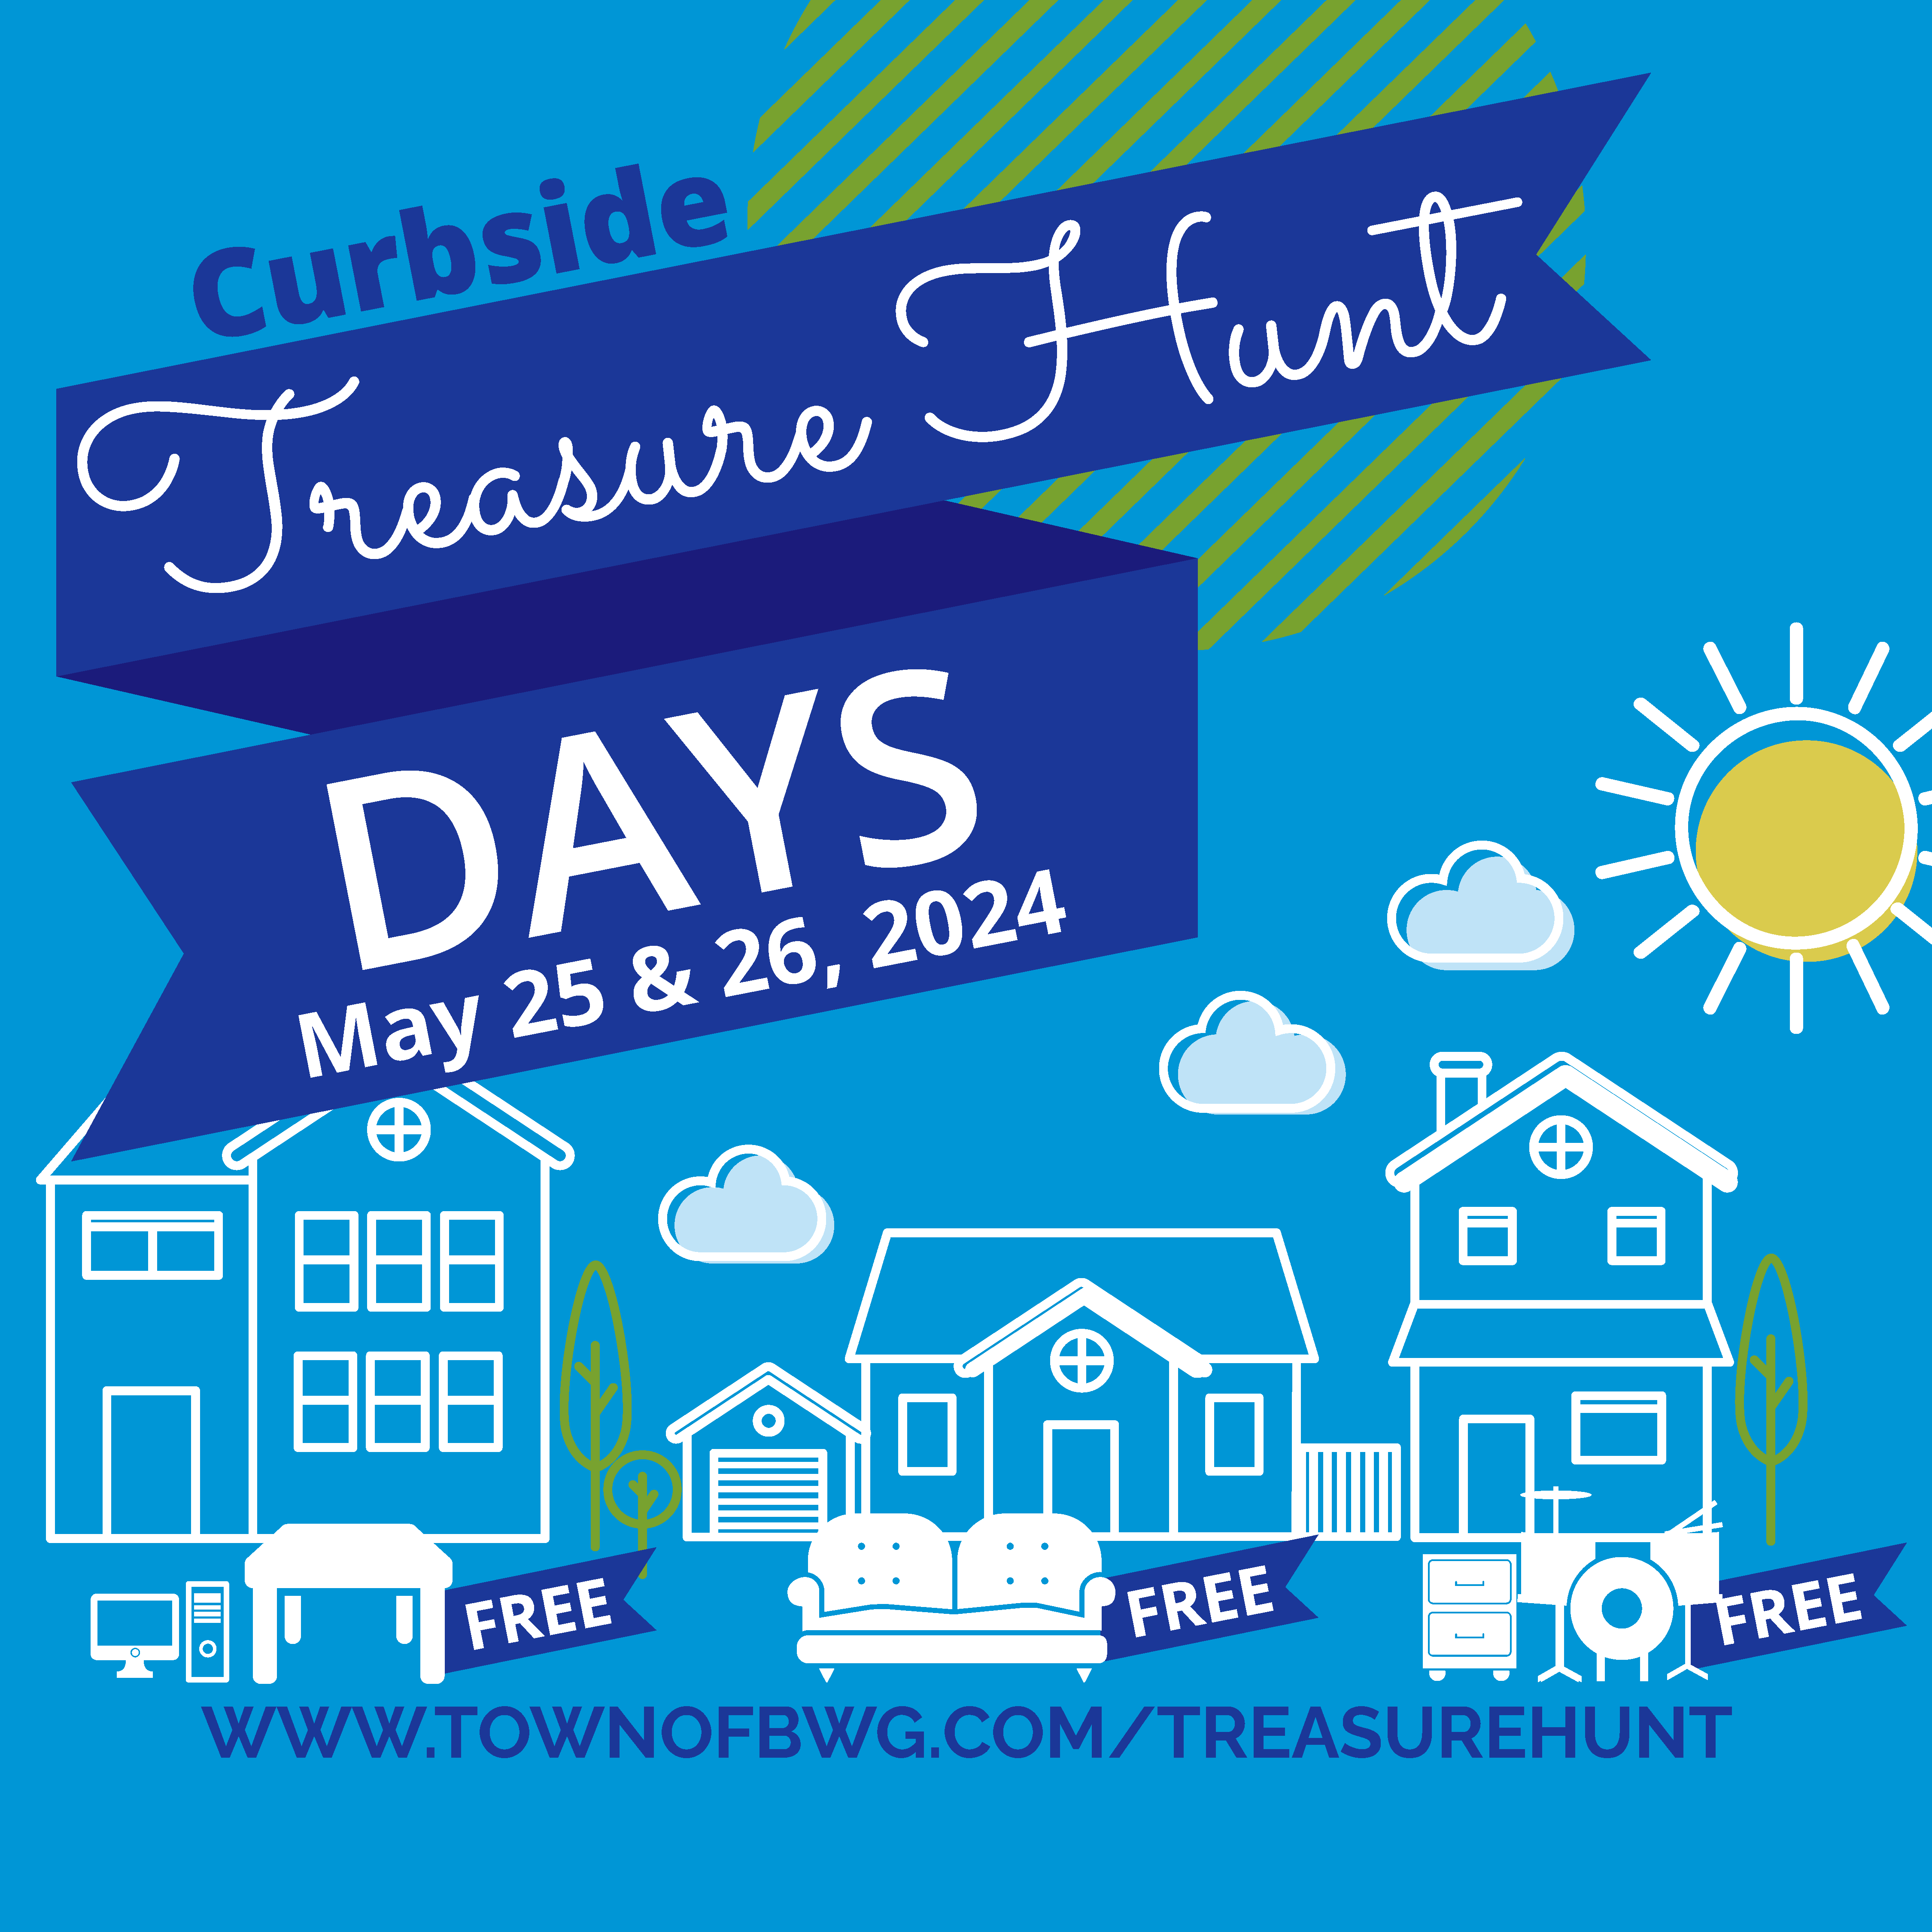 Curbside Treasure Hunt Days event banner, reading "Curbside Treasure Hunt Days" and illustration in the background showcasing items labelled "free" in front of homes